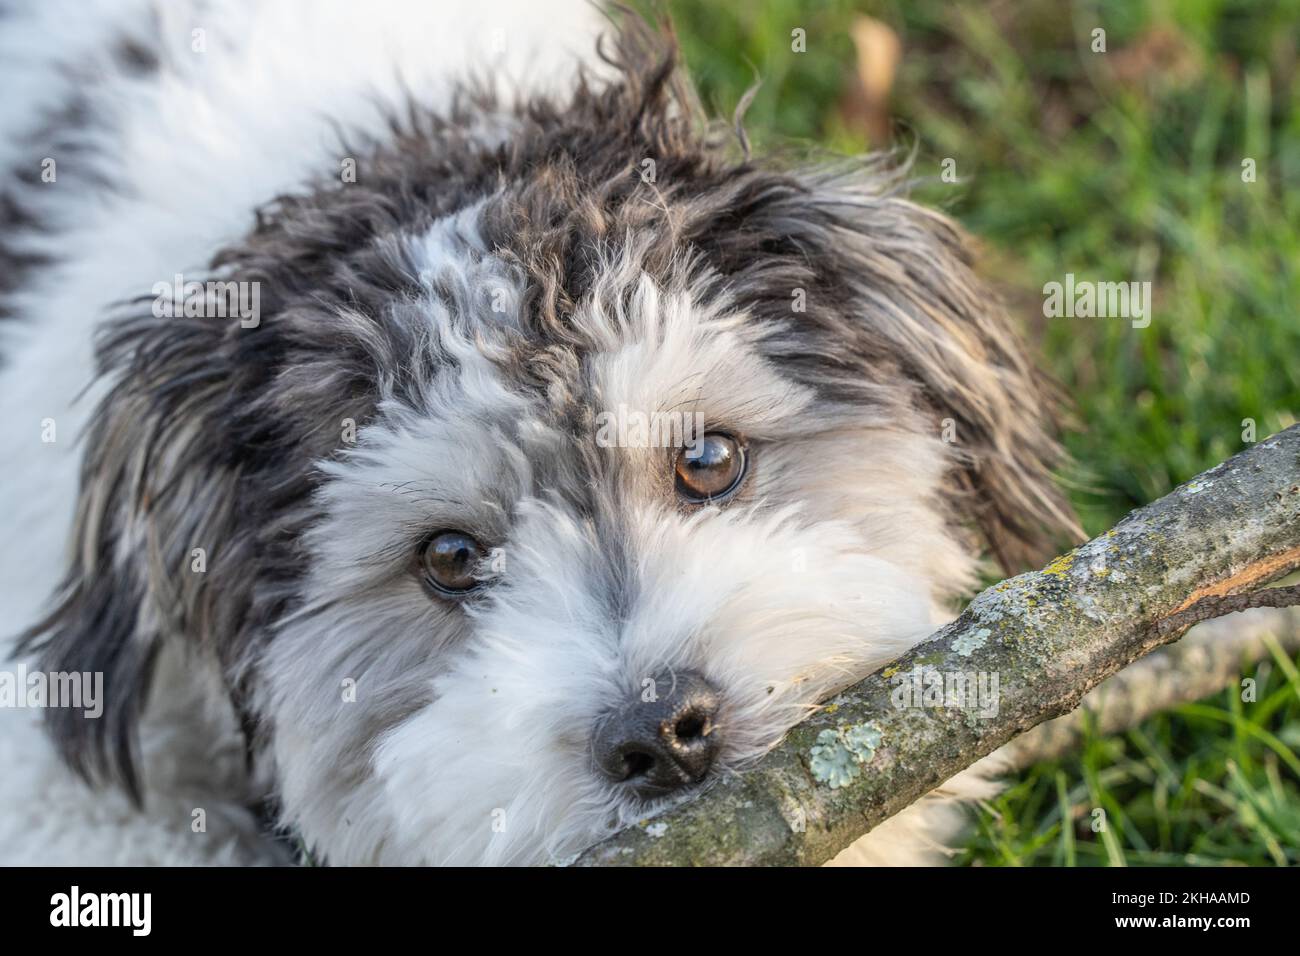 Adorable black and white puppy biting on a big stick. Stock Photo